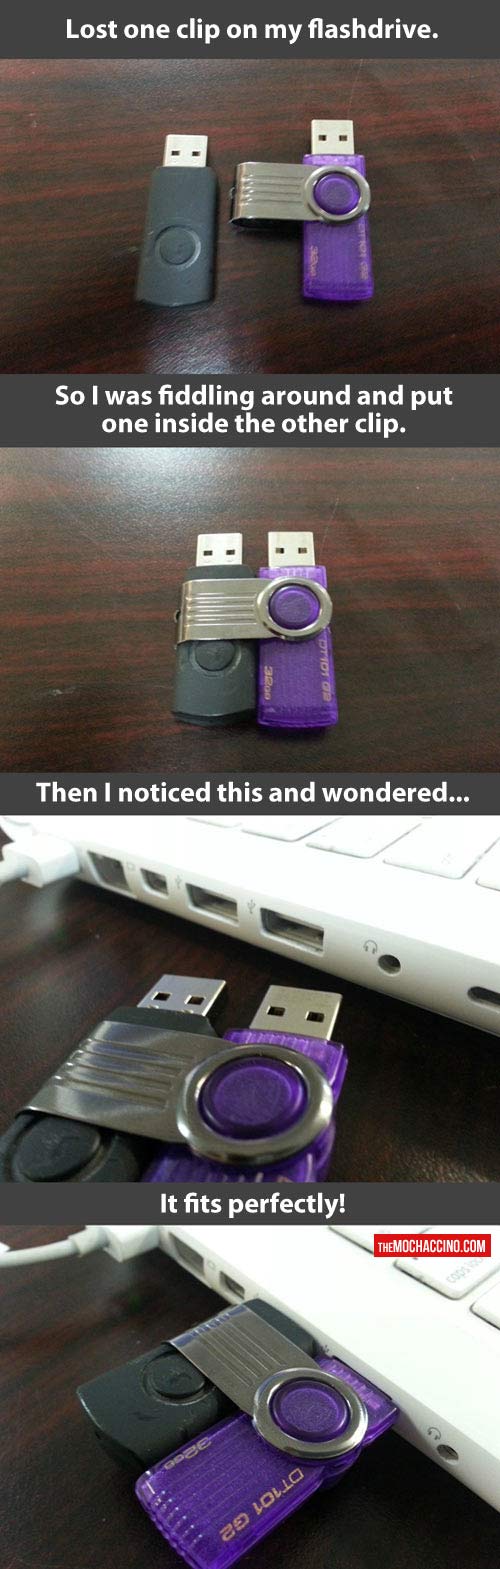 funny-flash-drive-pendrive-fit